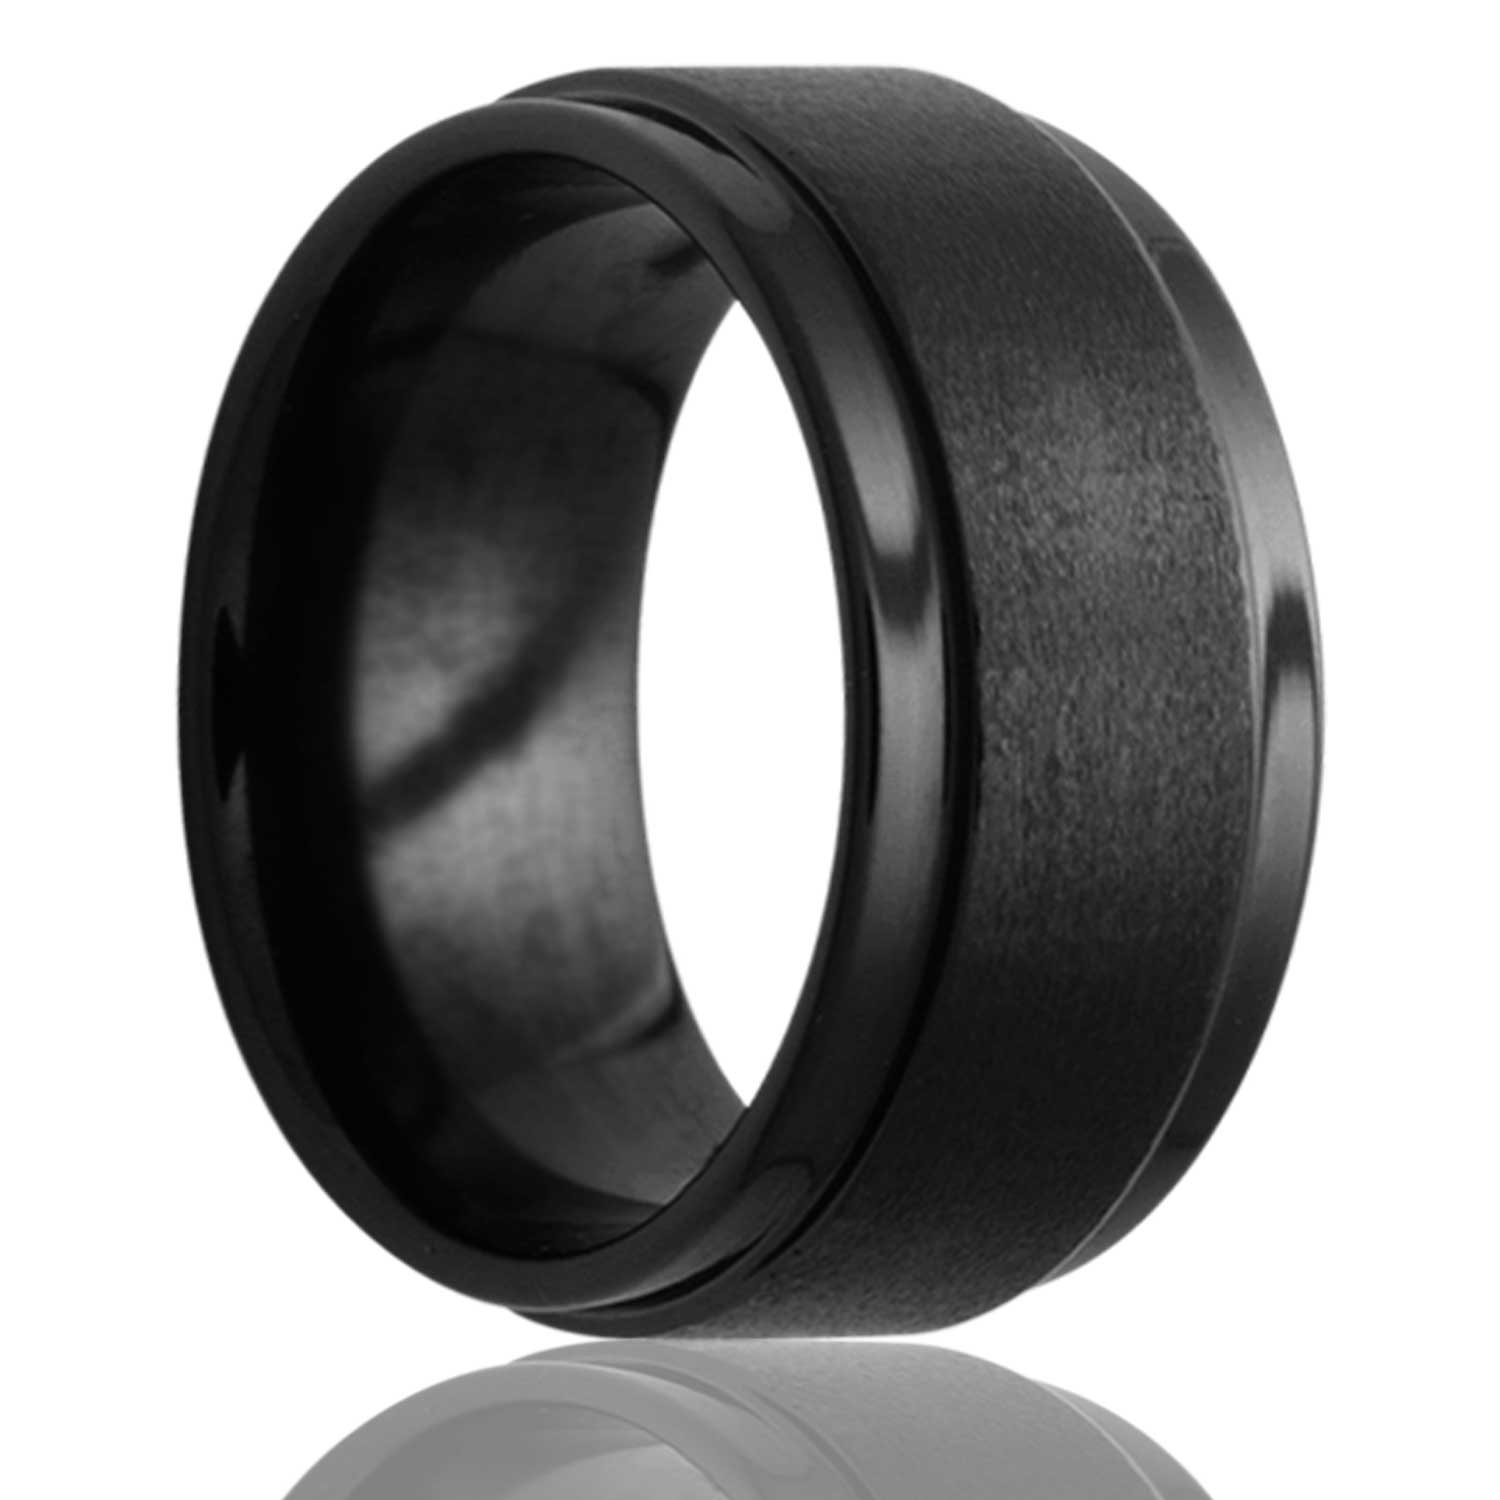 A satin finish black ceramic men's wedding band with stepped edges displayed on a neutral white background.